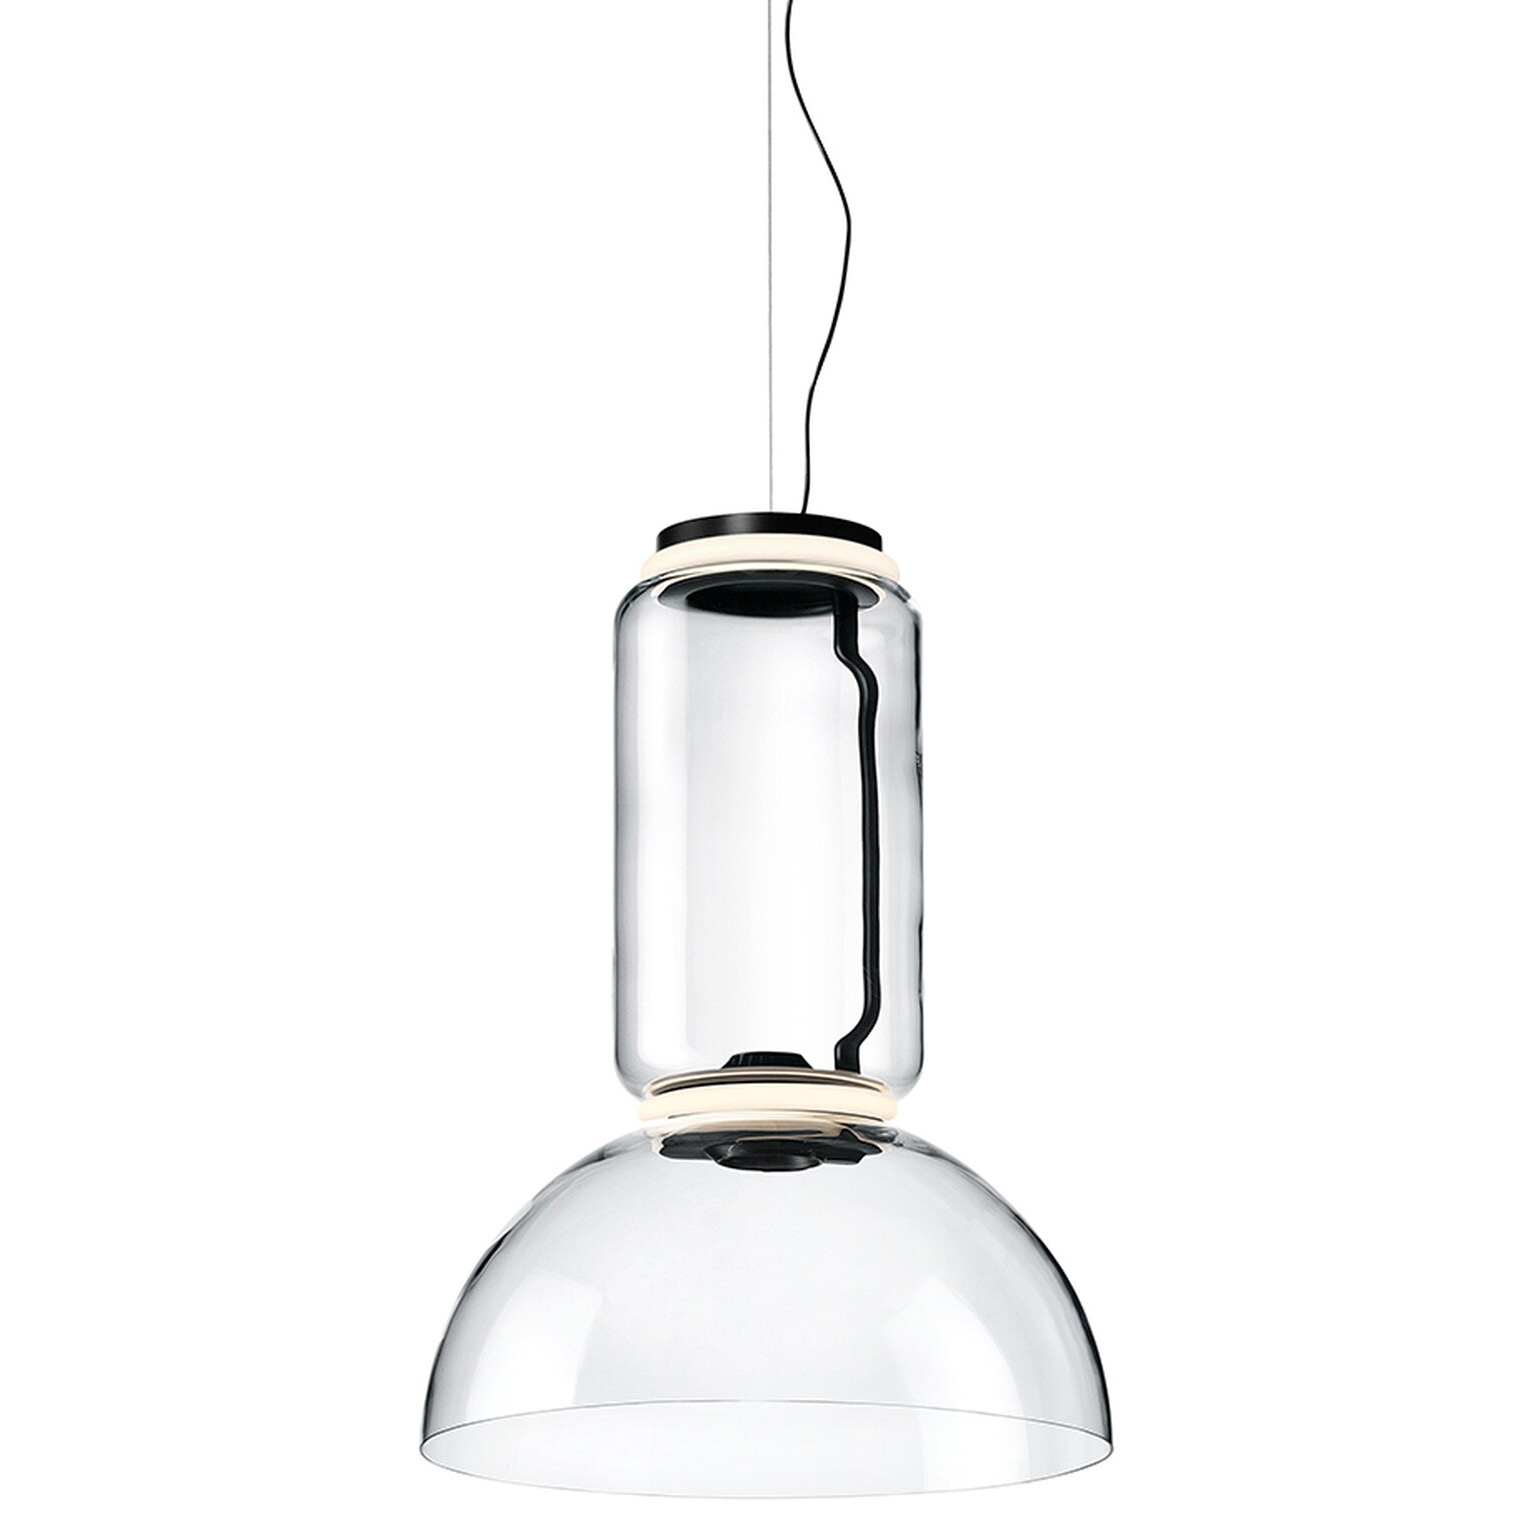 Noctambule Low Cylinder Pendant with by Flos Lighting | F0263000 | FLO861447